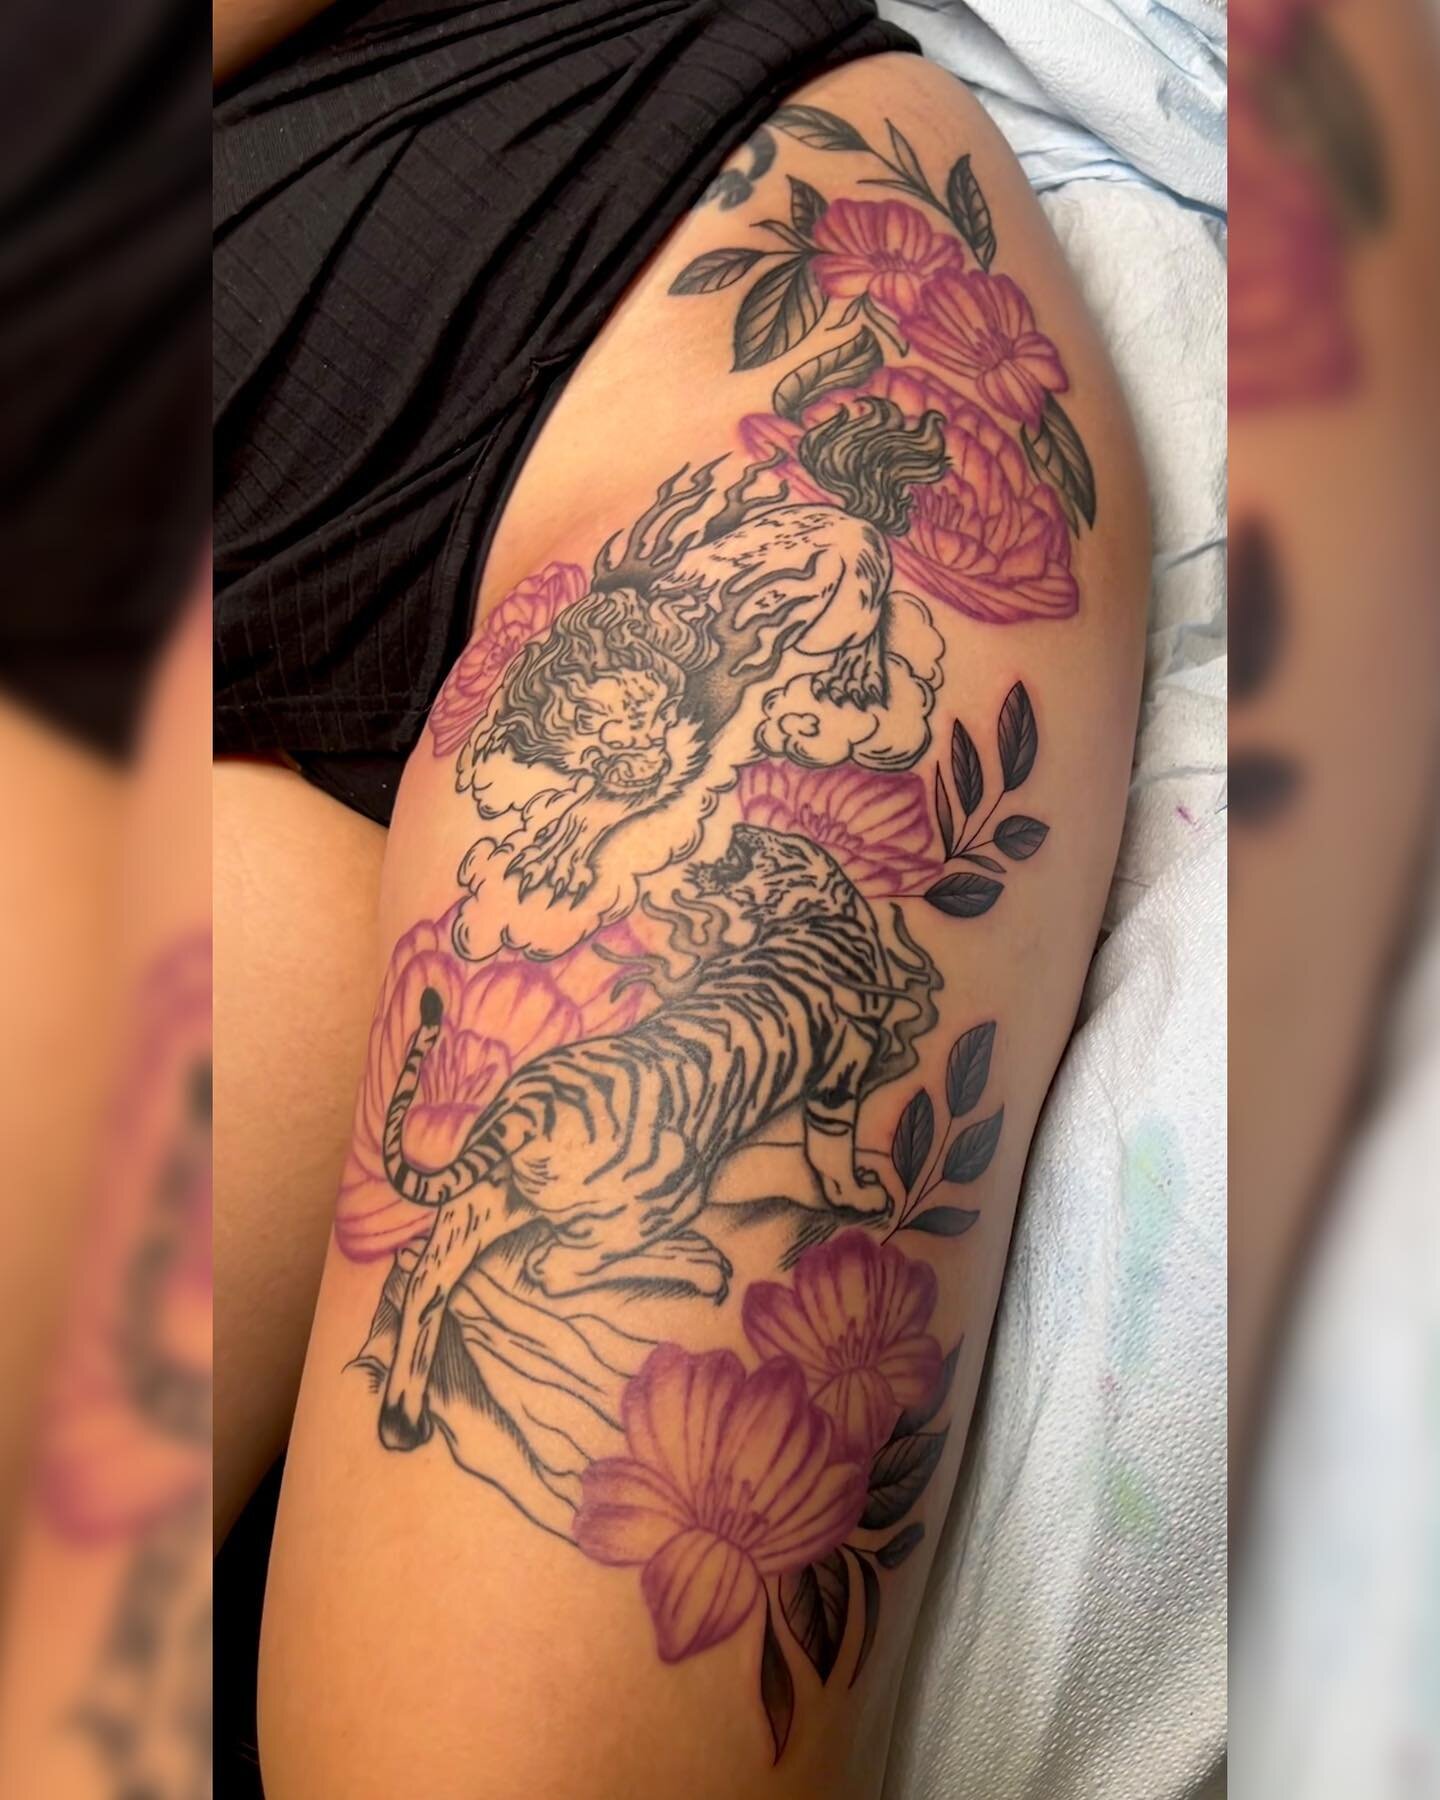 🌸🐅 fun flowy don&rsquo;t fuck with me thigh piece for an amazing regular client @chantedaf 🐅🌸 swipe for video. 

I know I don&rsquo;t post a whole lot of black and grey &amp; floral but I still love doing it, always 💓

@babalon.tattoo @eikondevi